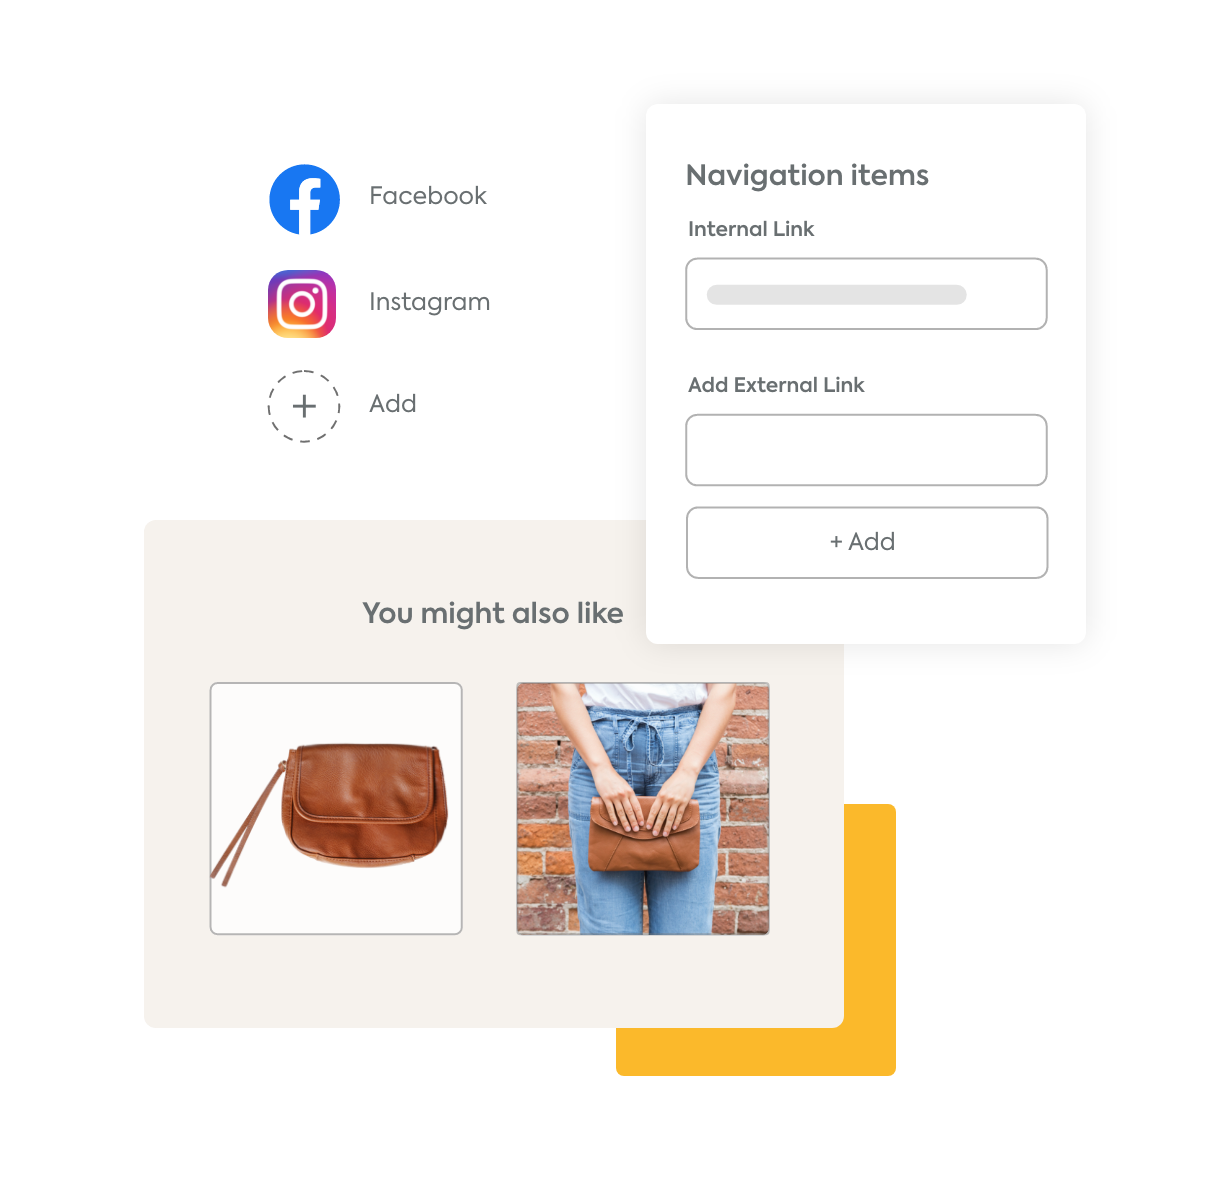 Elements of an e-commerce website from CommentSold including options to login via Facebook, Instagram, or continue as a guest; the cart with cart expiration countdown timer; and product view with 